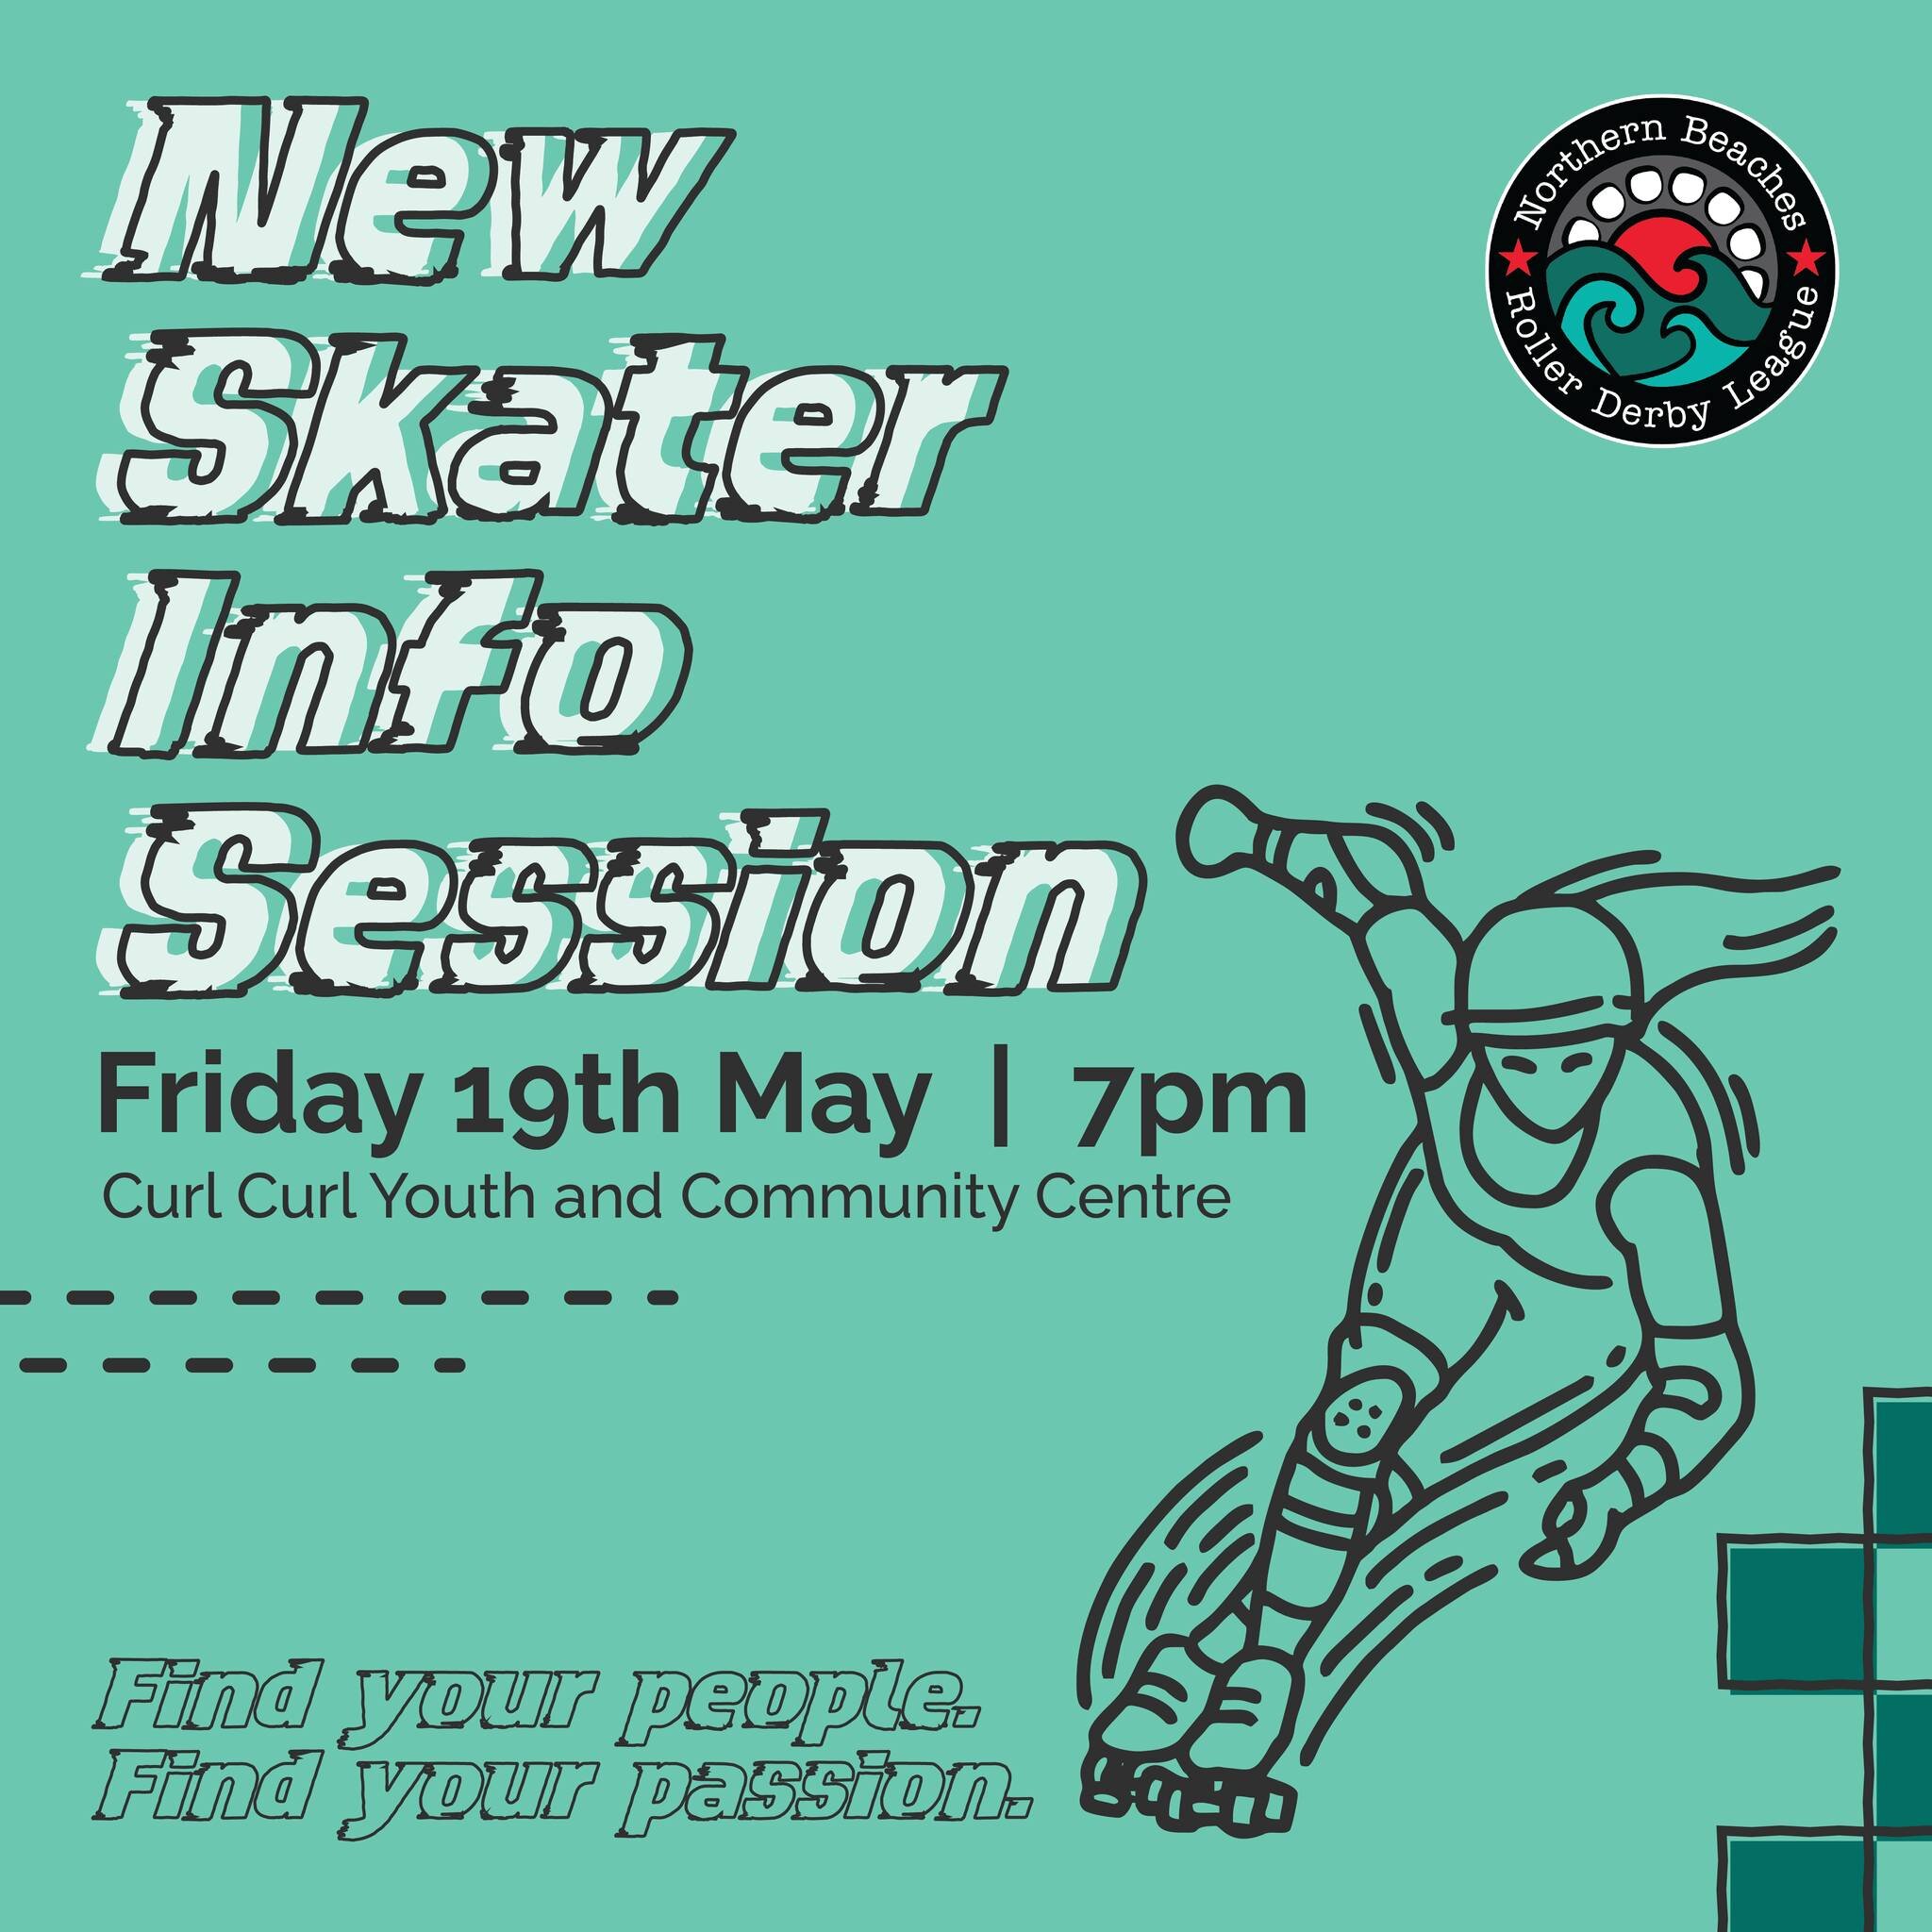 🚨TOMORROW🚨 We're looking for some awesome new skatey-friends! Our New Skater Info Session is coming up on Friday 19th May, and we'd love to meet you! Check out our facebook event for all the info. 
.
.
#rollerskating #rollerskatepractice #rollerder